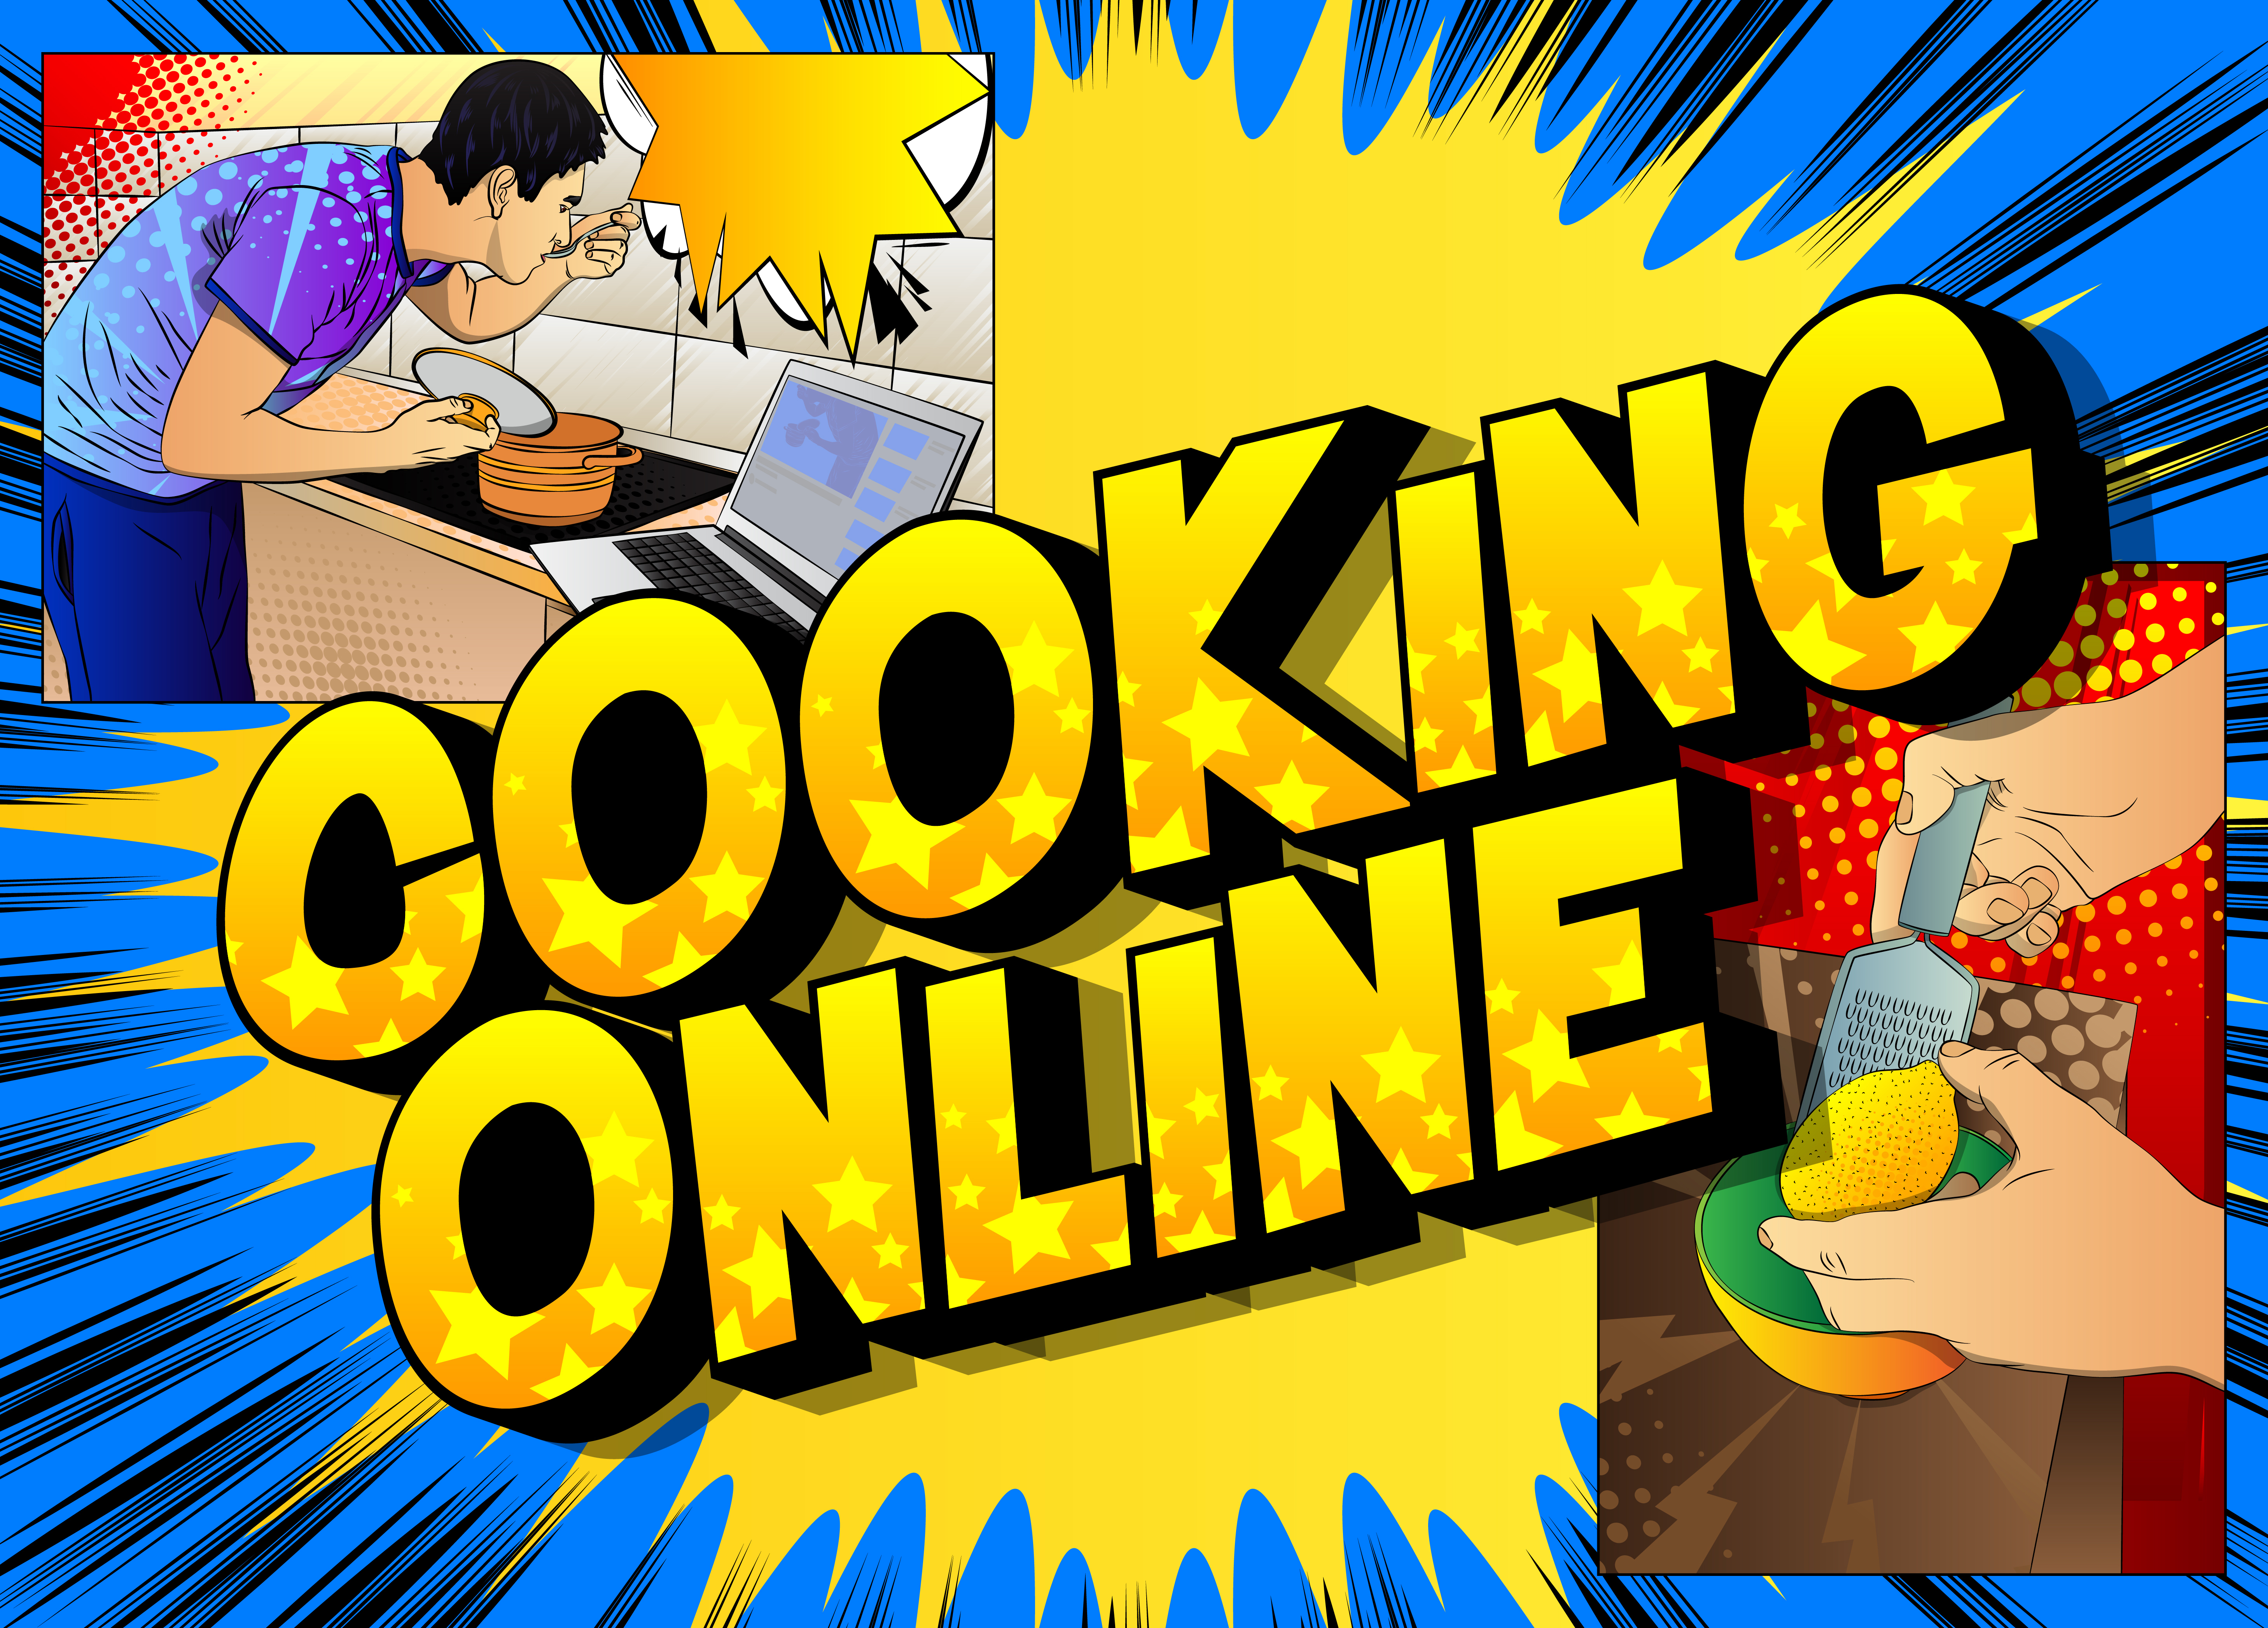 Comic book style poster for online cooking video blog. Man tasting soup from the pan while standing in the kitchen. Watching a cooking courses online.